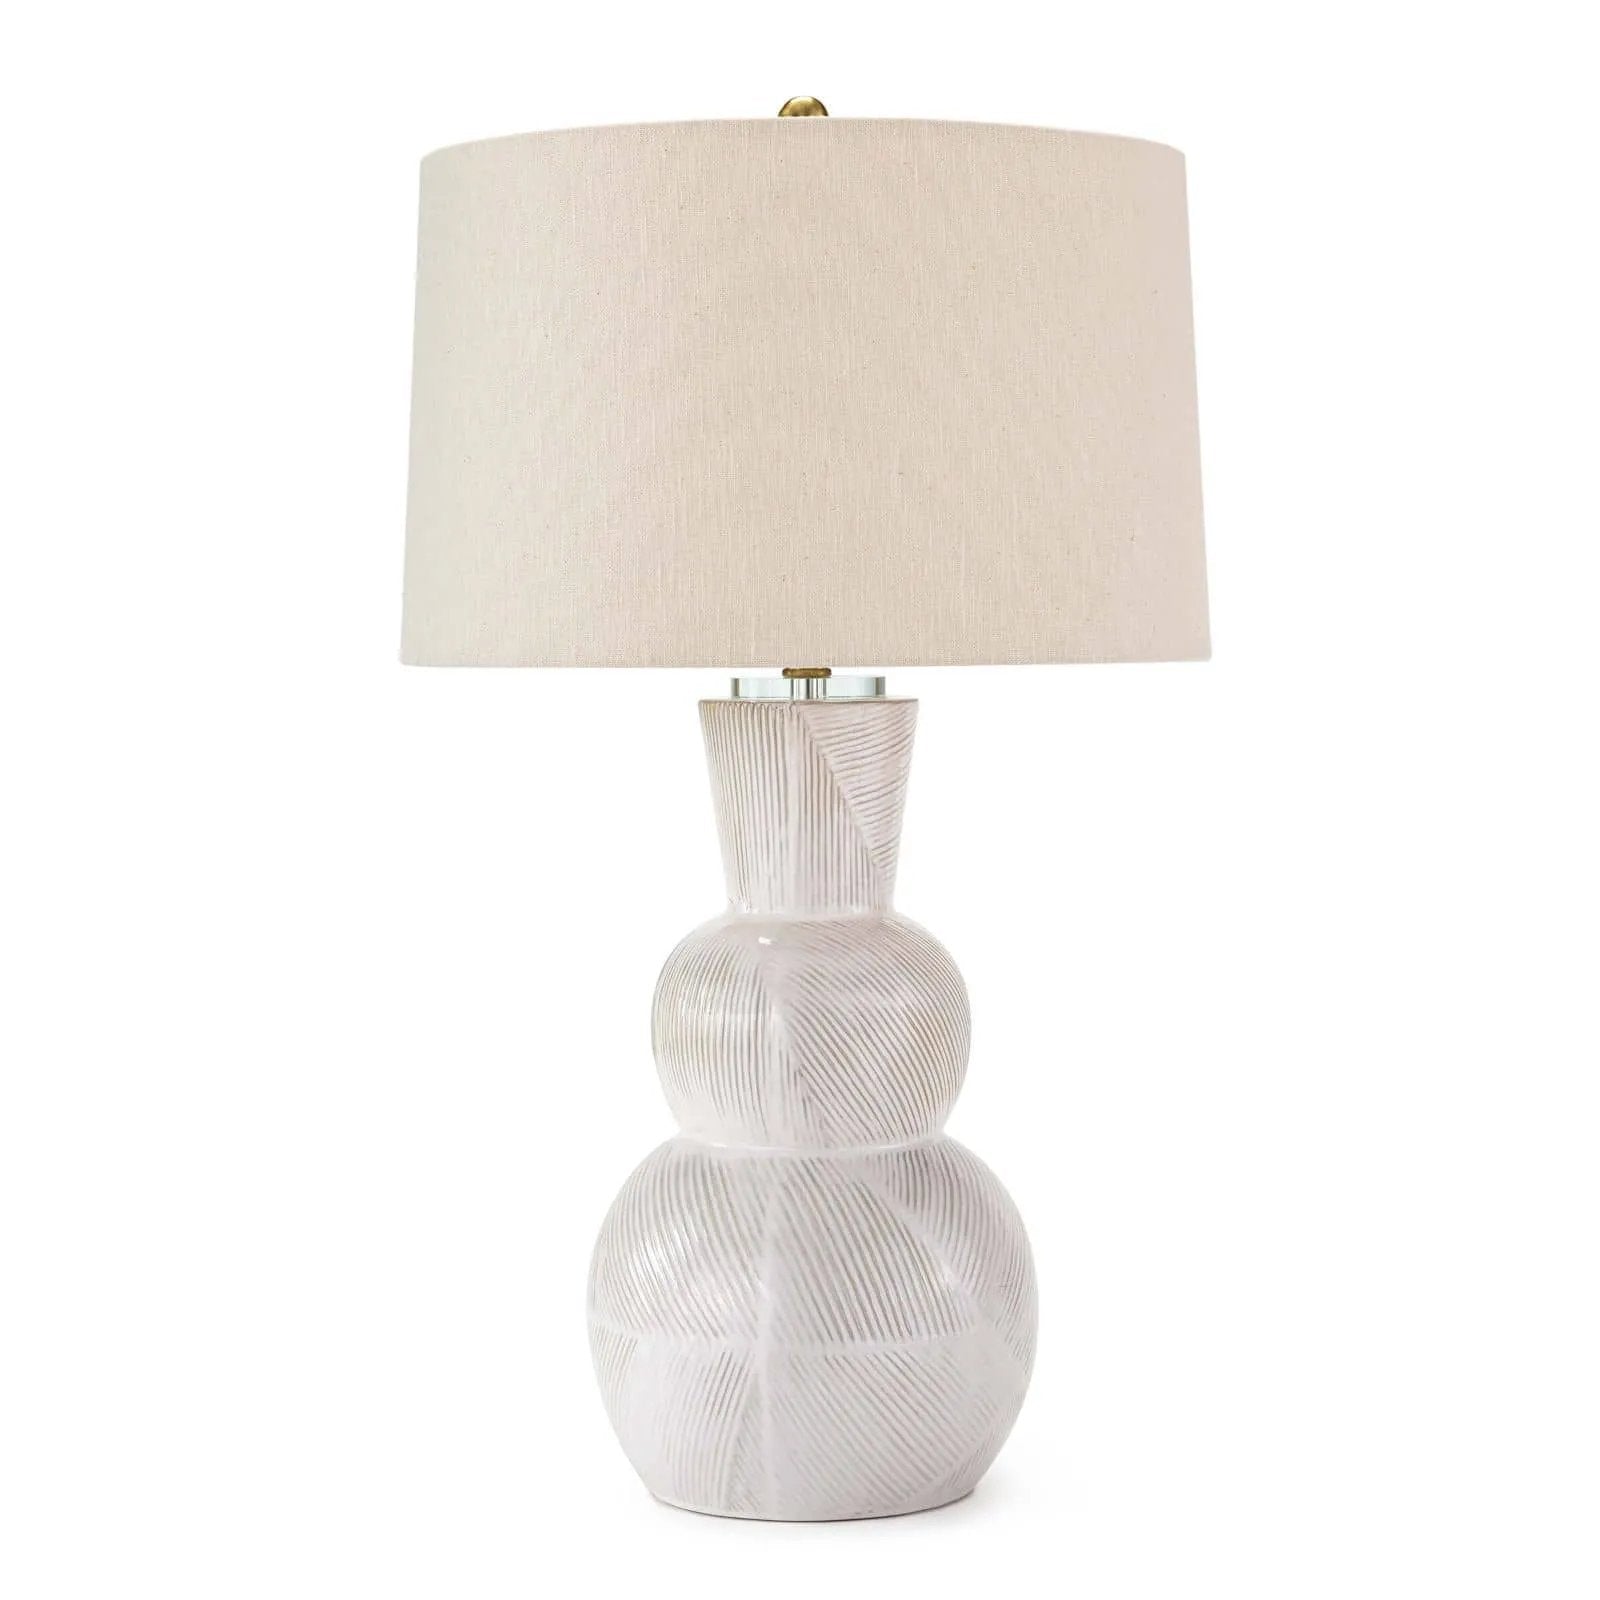 With its alluring silhouette, the Hugo ceramic table lamp brings contemporary appeal and modern contrast to interiors. Employing a specialized glazing technique, master artisans hand-shape earthenware to produce a luxurious finish for subtle highs and lows that shift with the light source above. Amethyst Home provides interior design, new home construction design consulting, vintage area rugs, and lighting in the Houston metro area.